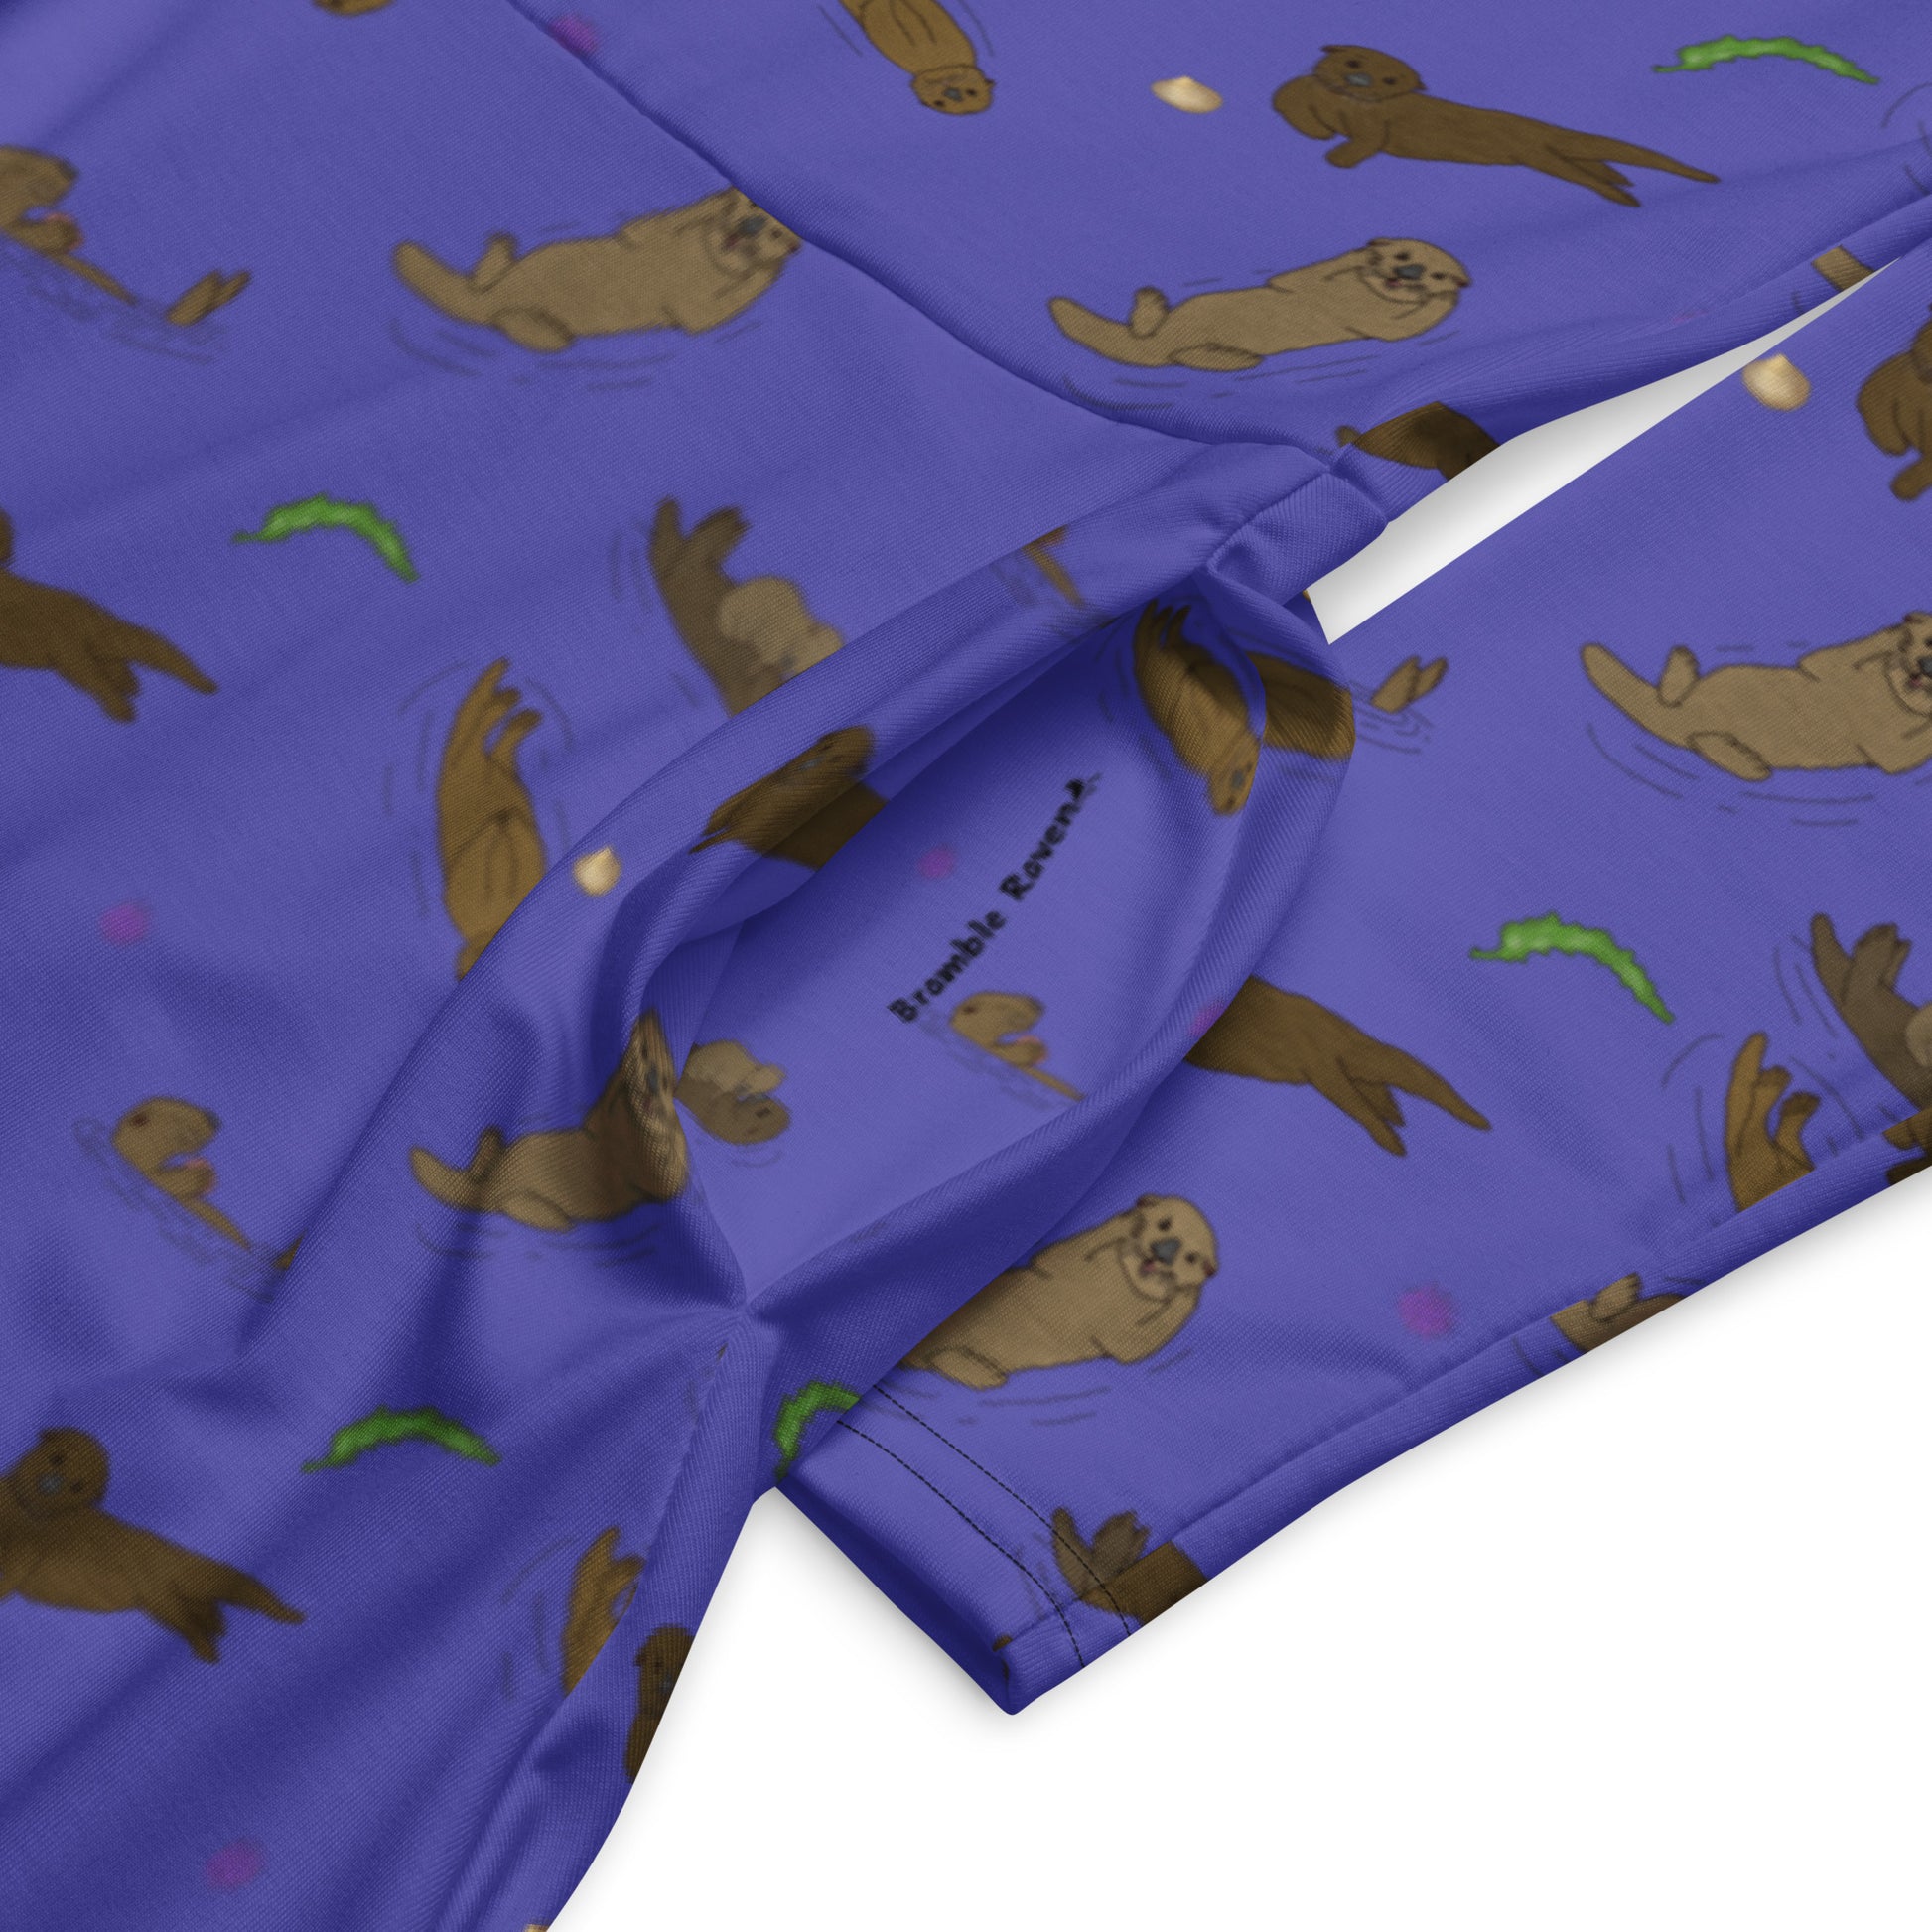 Long sleeve midi dress with fitted waist, flared bottom, and side pockets. Features a patterned design of sea otters, seashells, seaweed, and sea urchins on a purple background. Detail view of pocket with Bramble Raven logo.